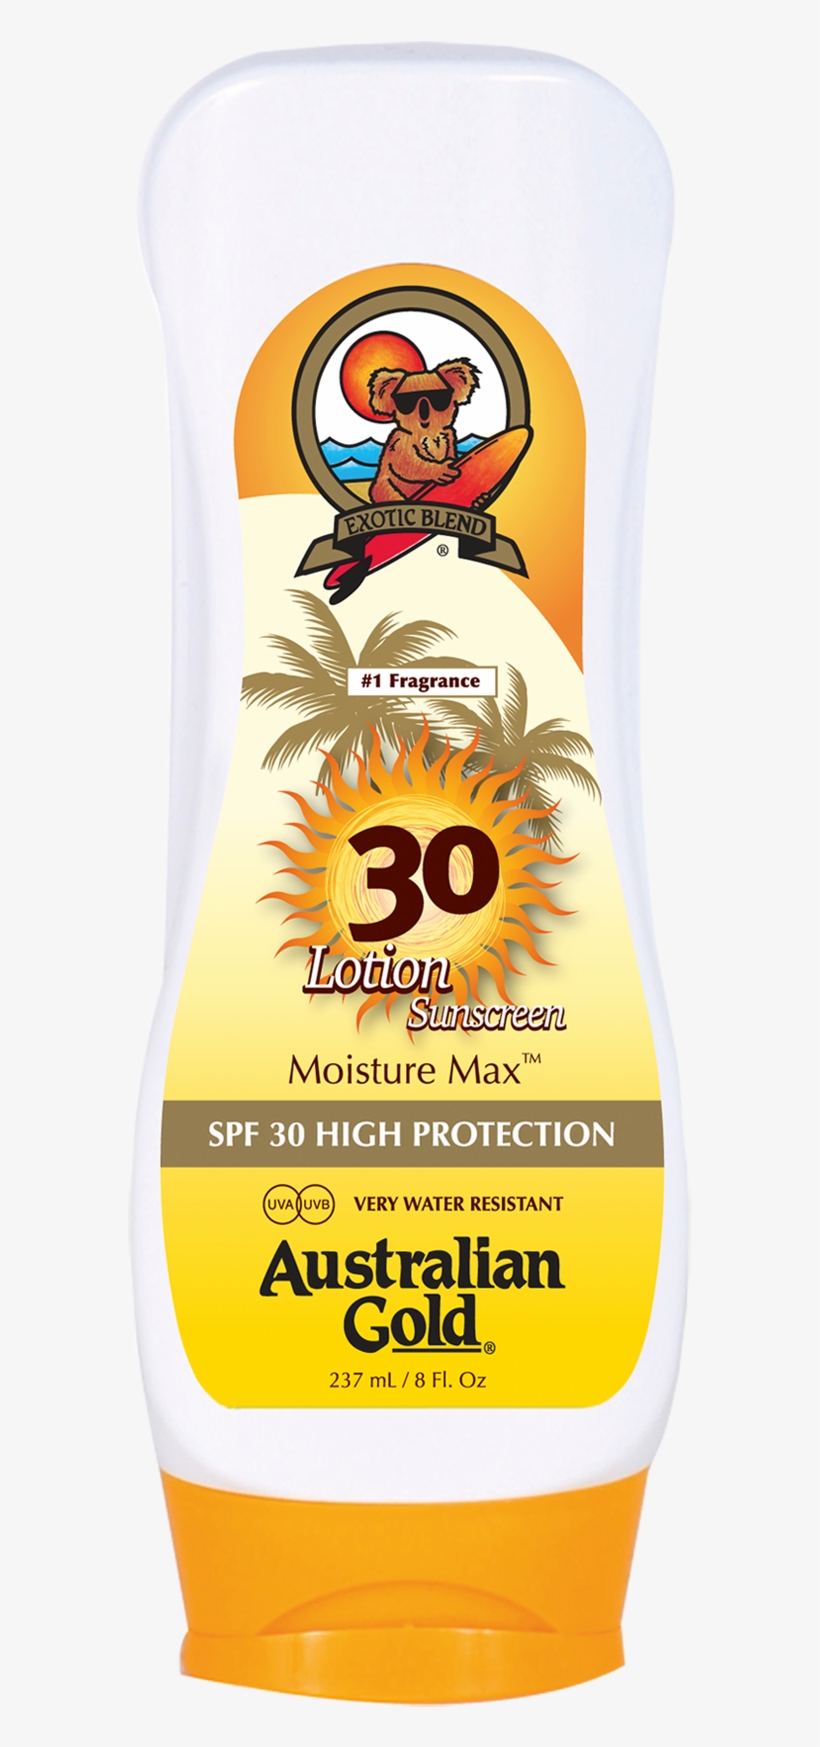 Australian Gold Spf 30 Lotion Without Bronzer - Australian Gold Lotion Sunscreen Spf - Free Transparent PNG Download - PNGkey